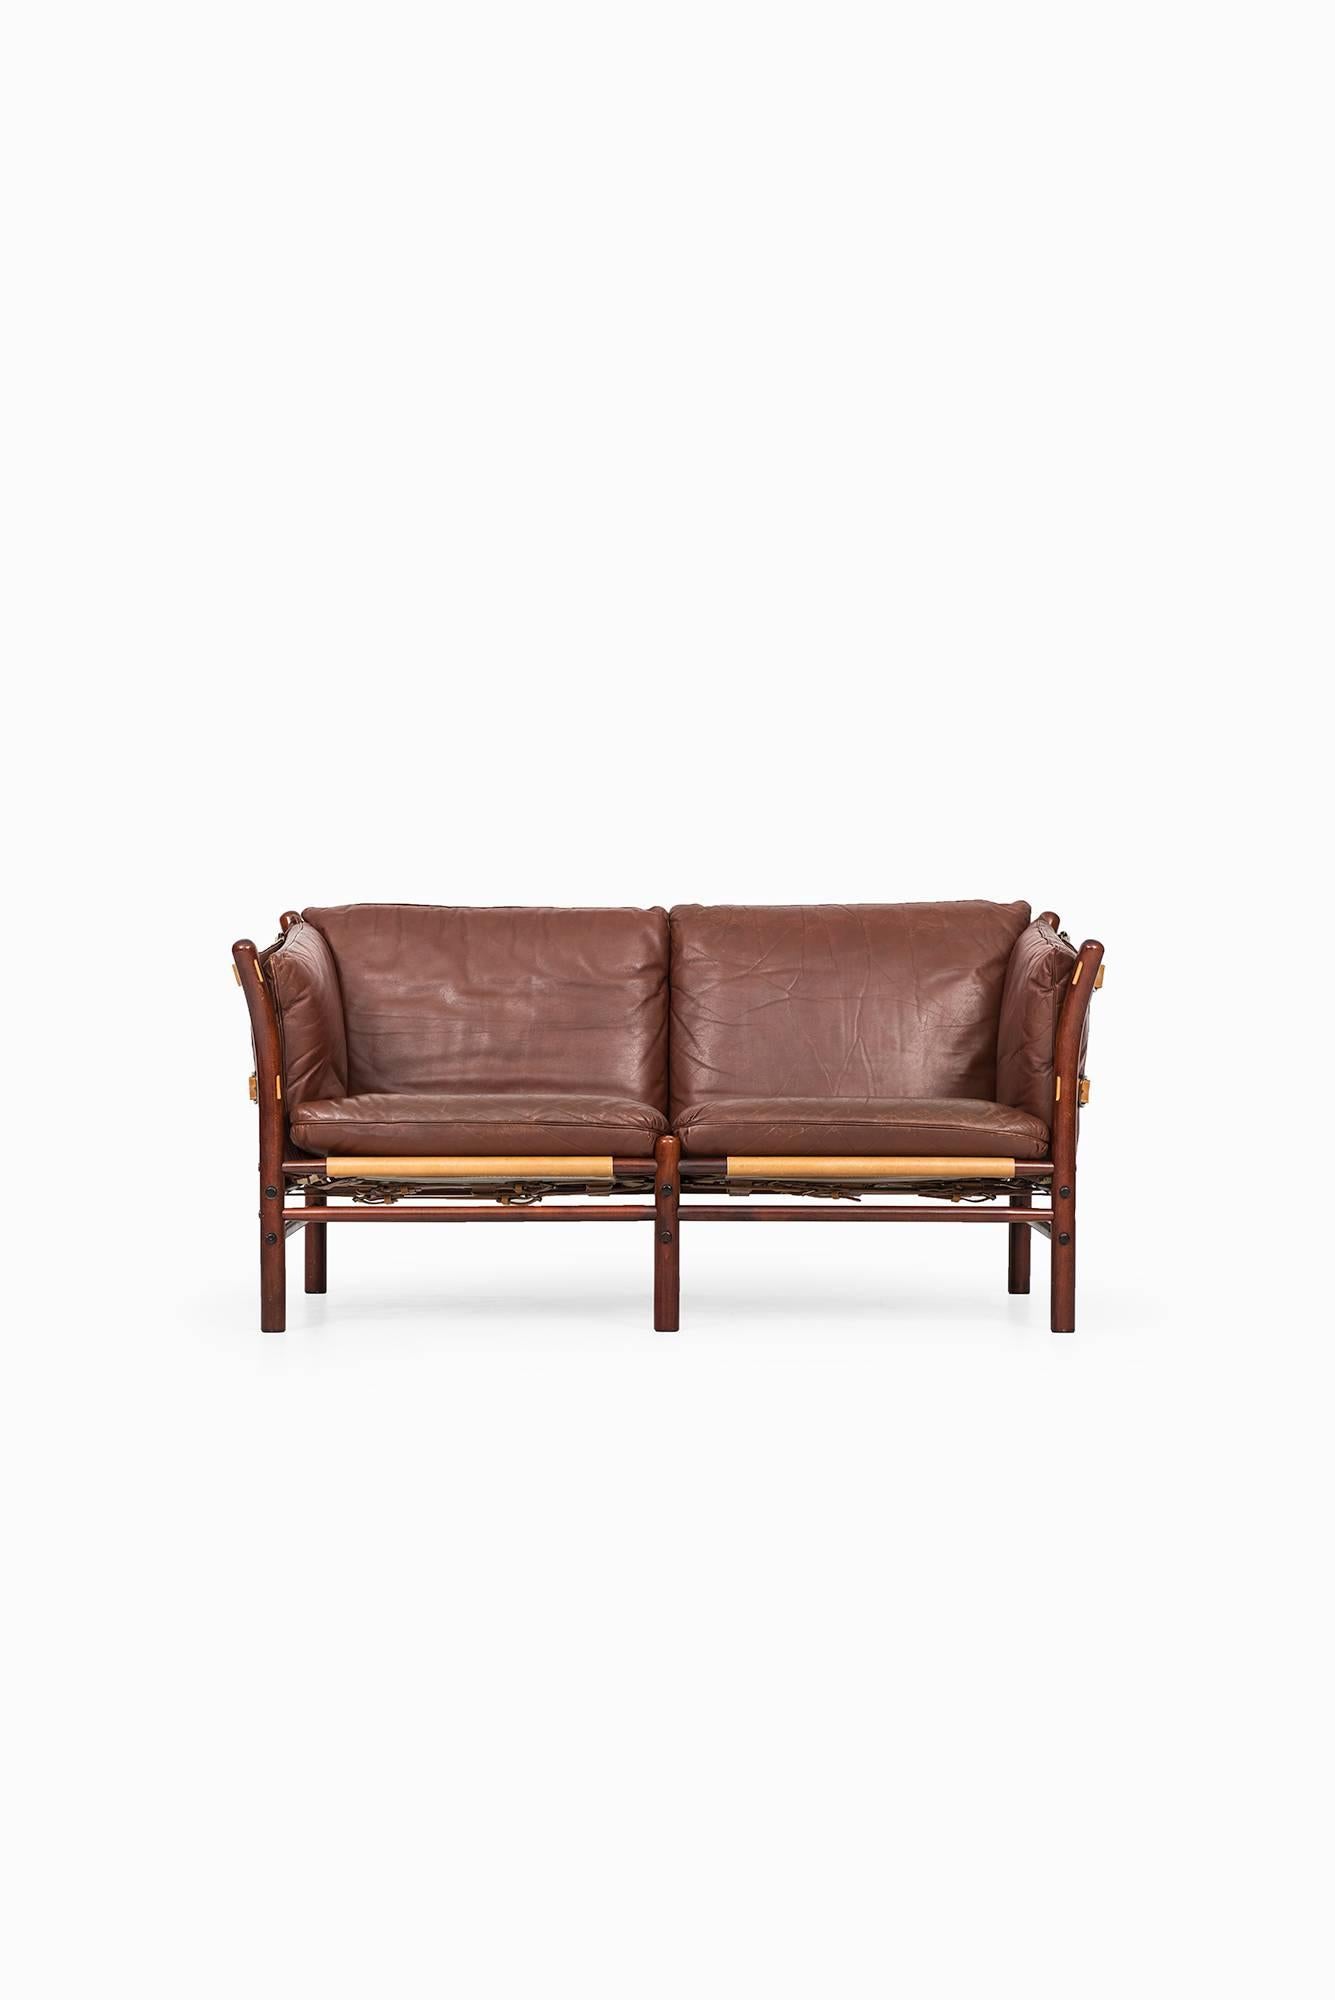 Mid-20th Century Arne Norell Pair of Sofas Model Ilona by Arne Norell AB in Sweden